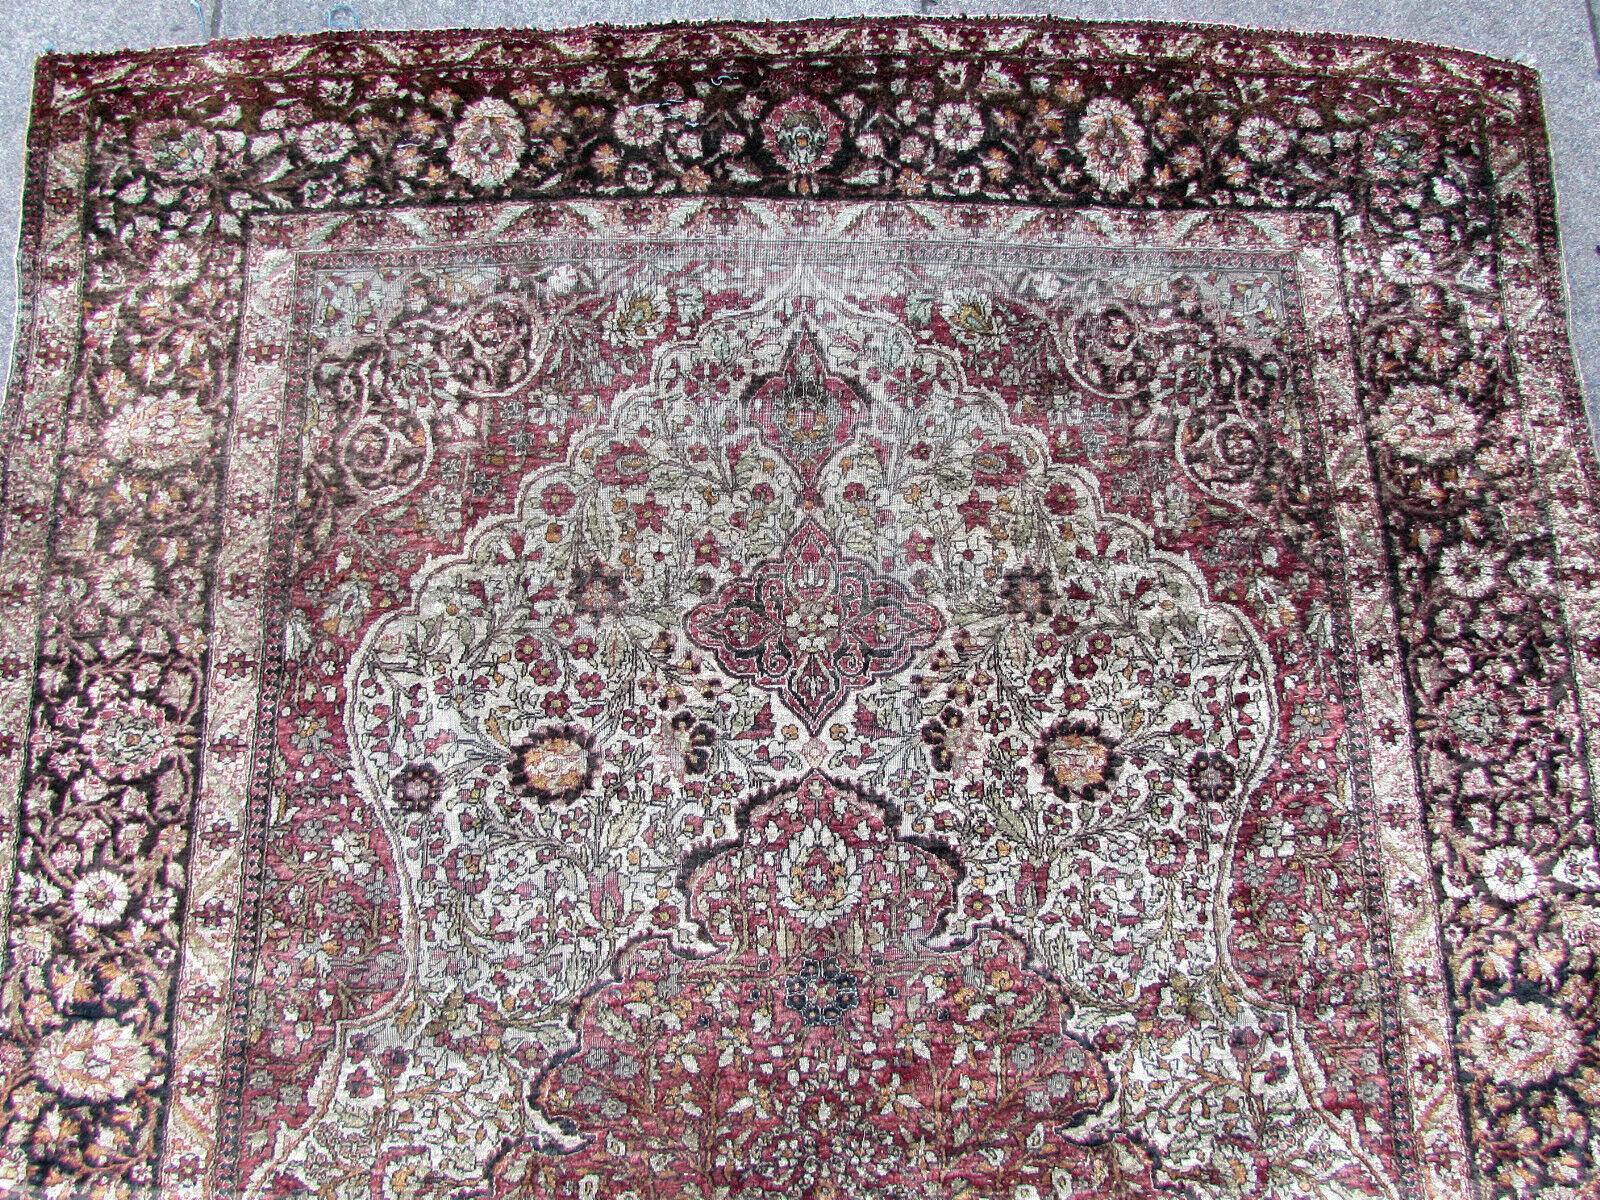 Handmade antique Tabriz rug made in silk. The rug is from the beginning of 20th century, it is in original condition, has some low pile and age wears.

-Condition: Original, some low pile, age wear,

-circa 1910s,

-Size: 4.3' x 7' (127cm x